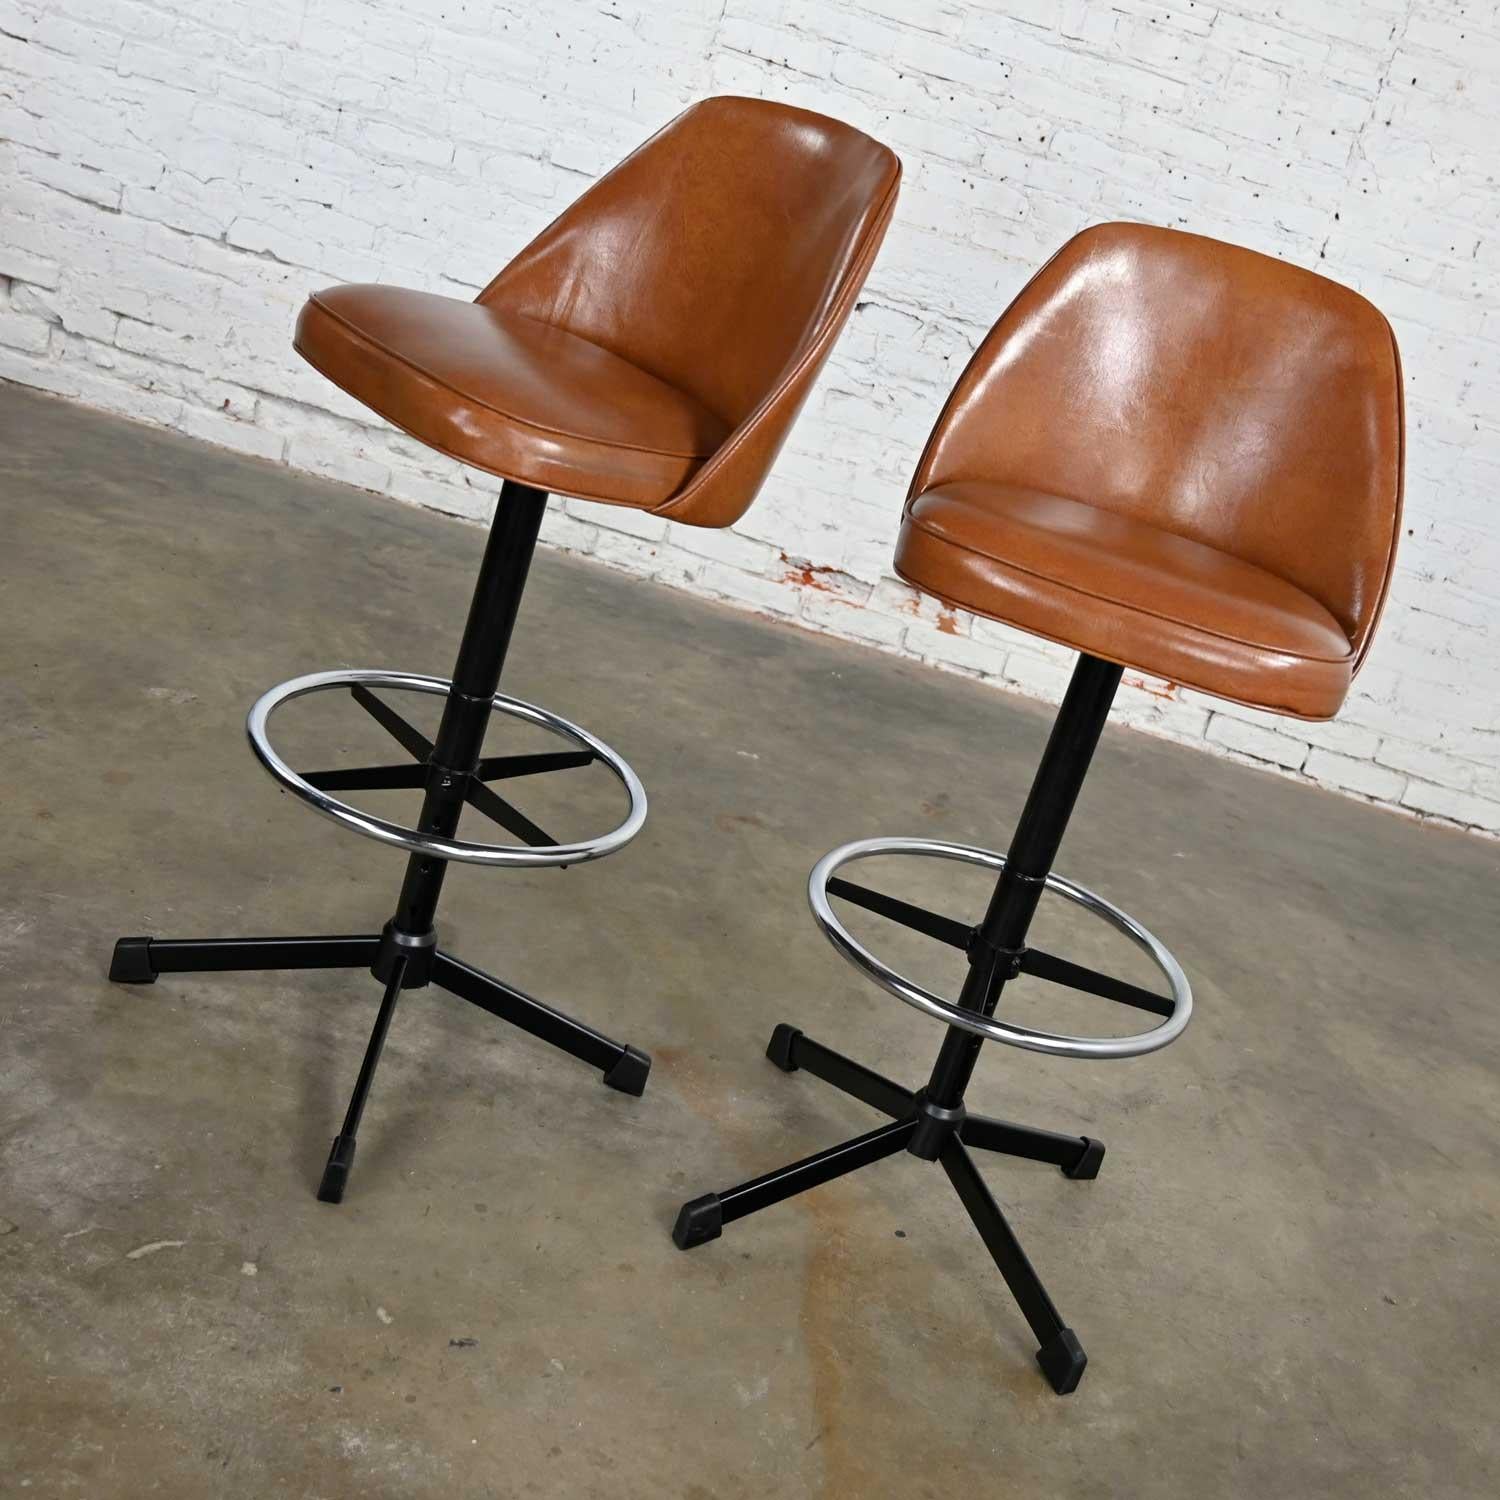 Lovely pair of vintage modern Cosco counter or bar stools comprised of cognac, aka brown, vinyl, black painted steel shafts, 4 prong bases, chrome ring footrests, swivel option, and 4 height adjustments. Beautiful condition, keeping in mind that